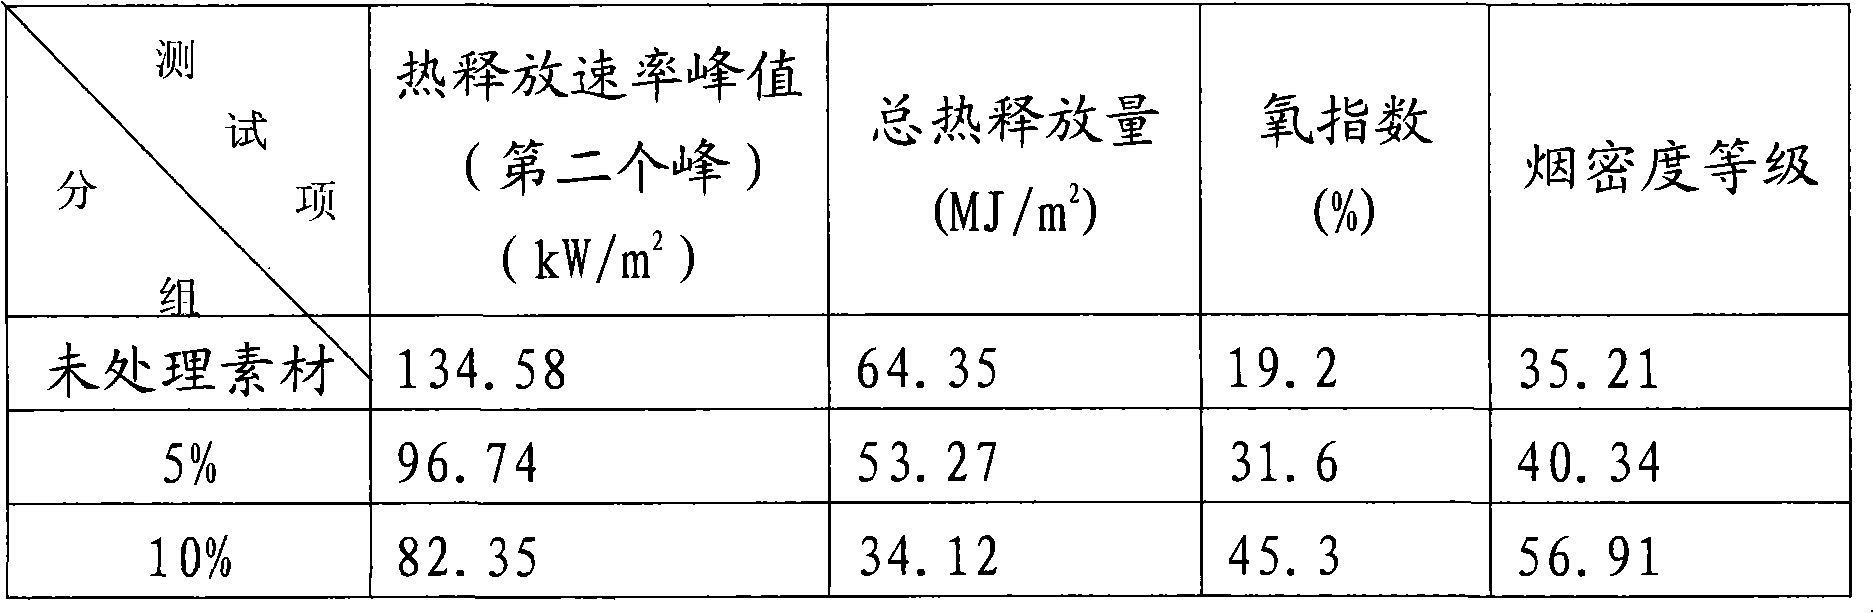 Preparation method of phosphate timber fire retardant and method for processing timber by using fire retardant